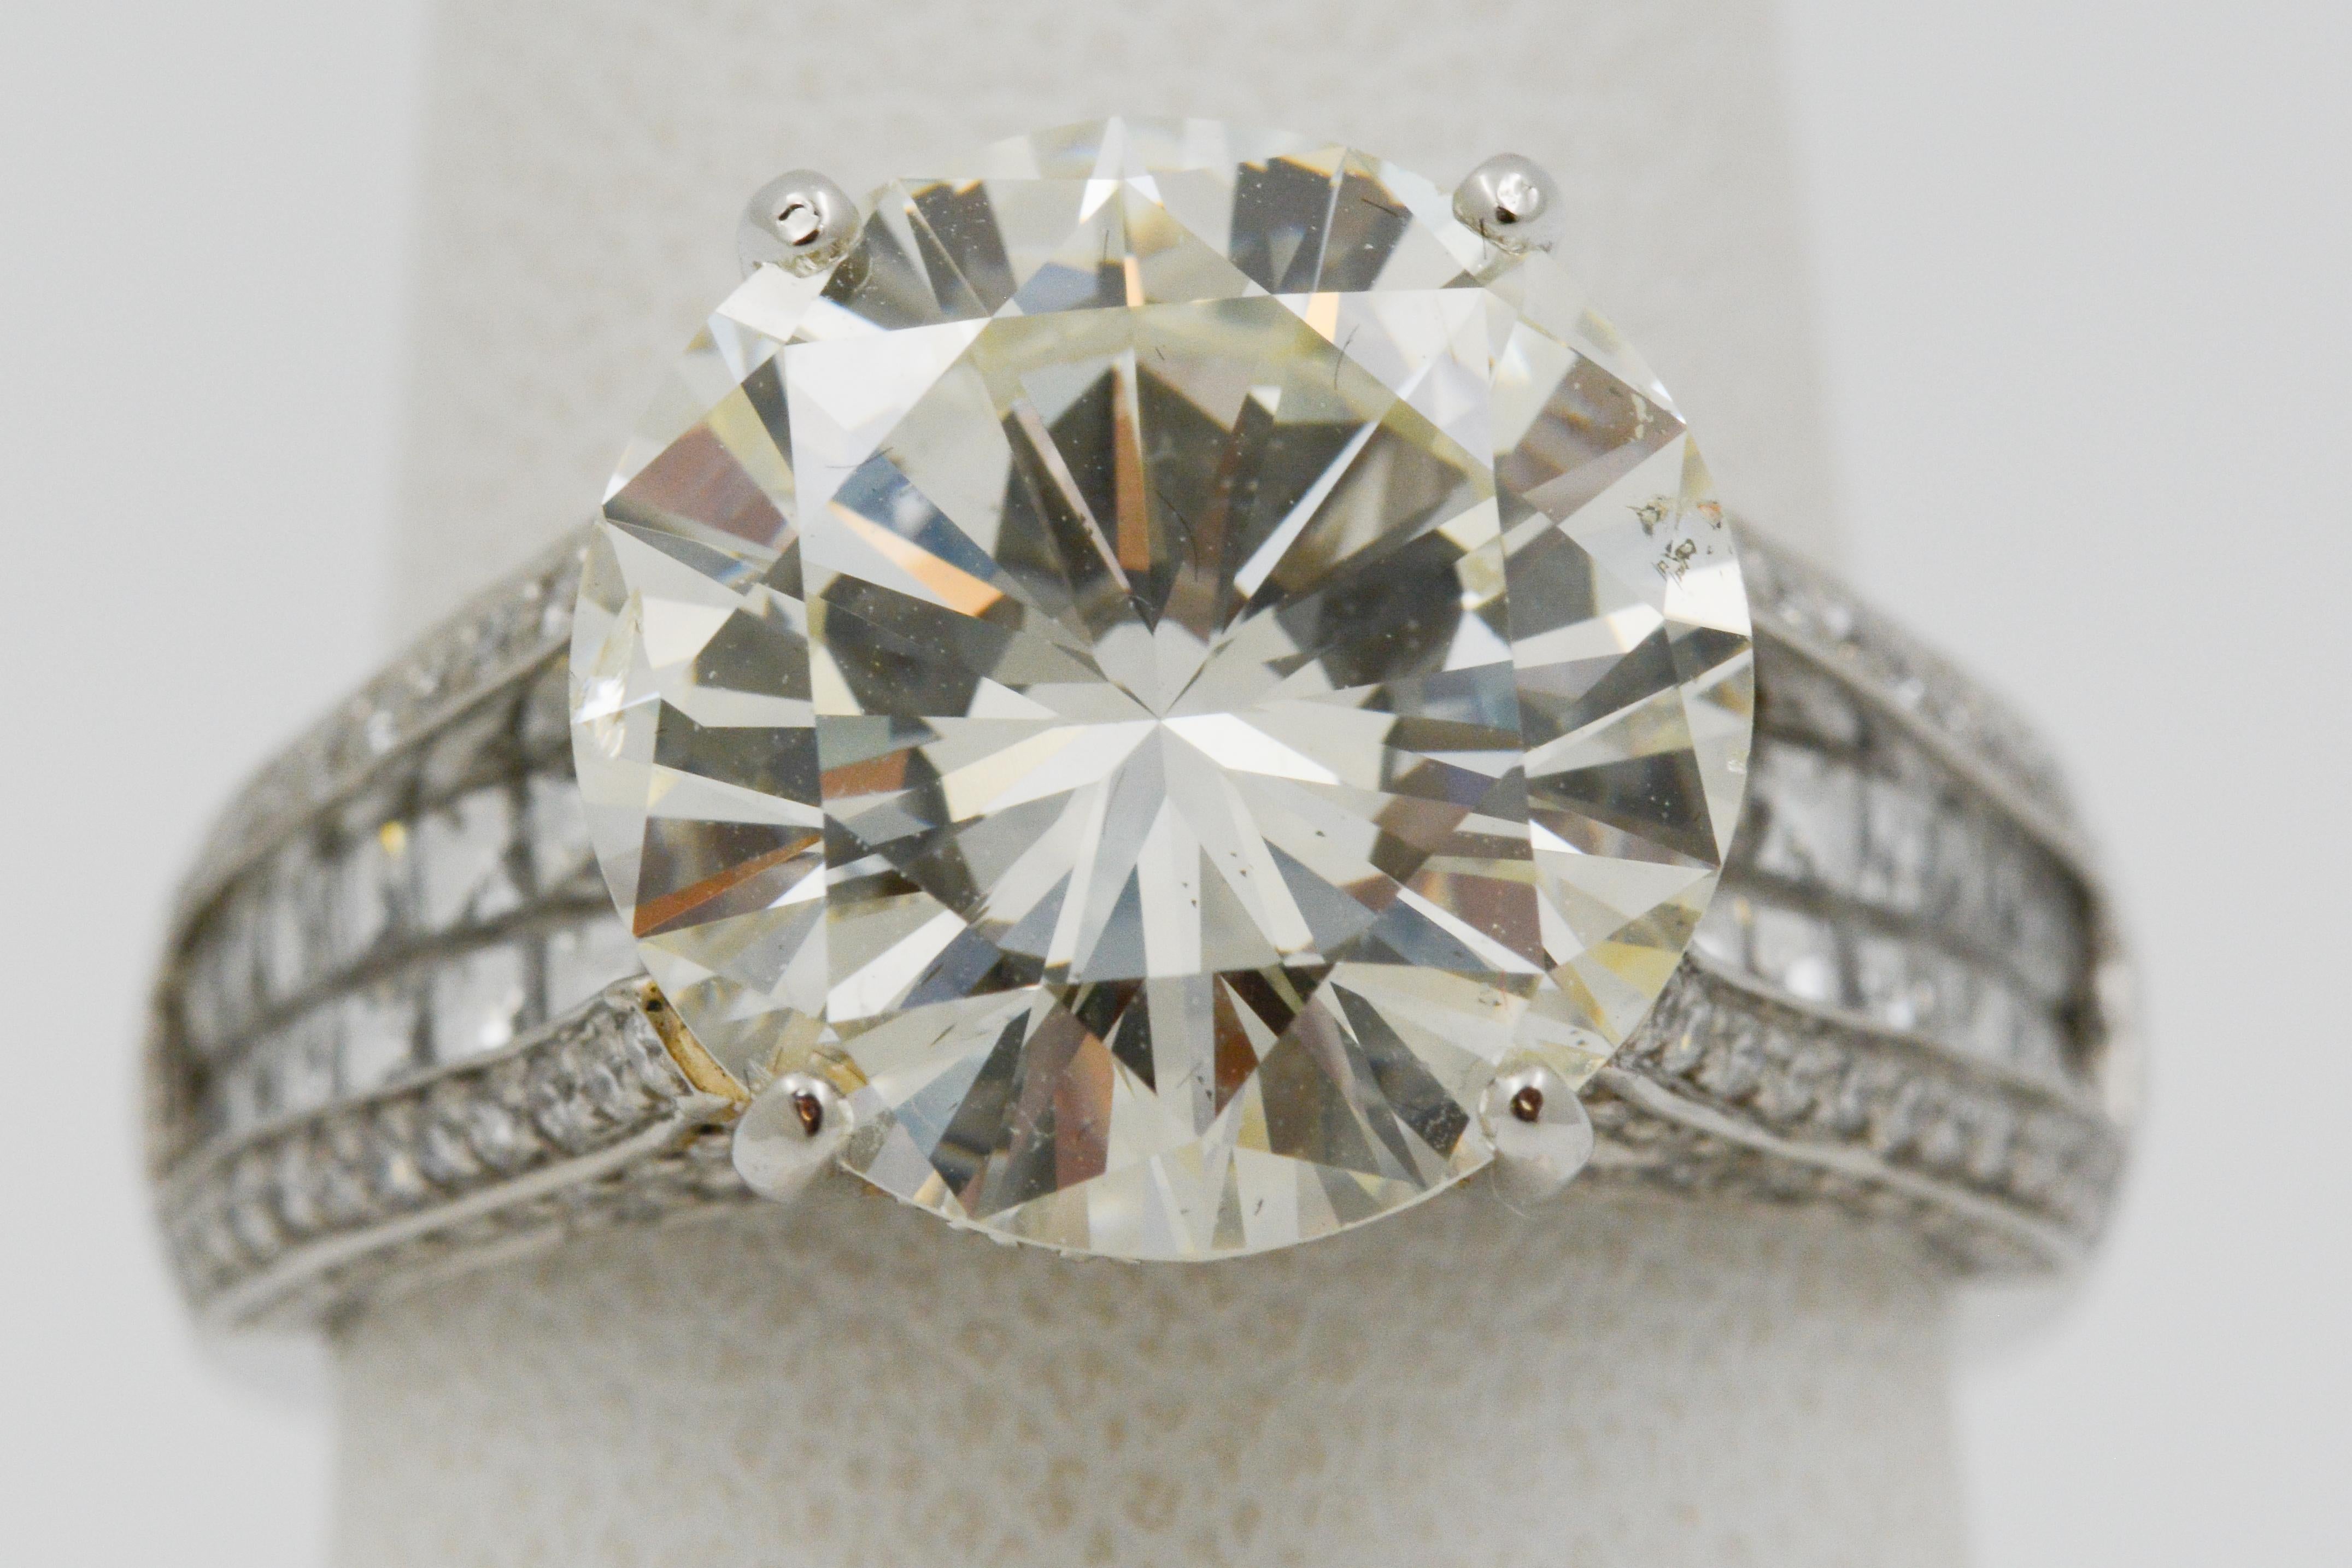 This diamond and platinum engagement ring showcases a 6.01ctw round brilliant cut diamond with M color and SI2 clarity. It also has two rows of blaze cut diamonds in the center row (.73ctw), pave diamonds in the gallery, outer rows and edges half